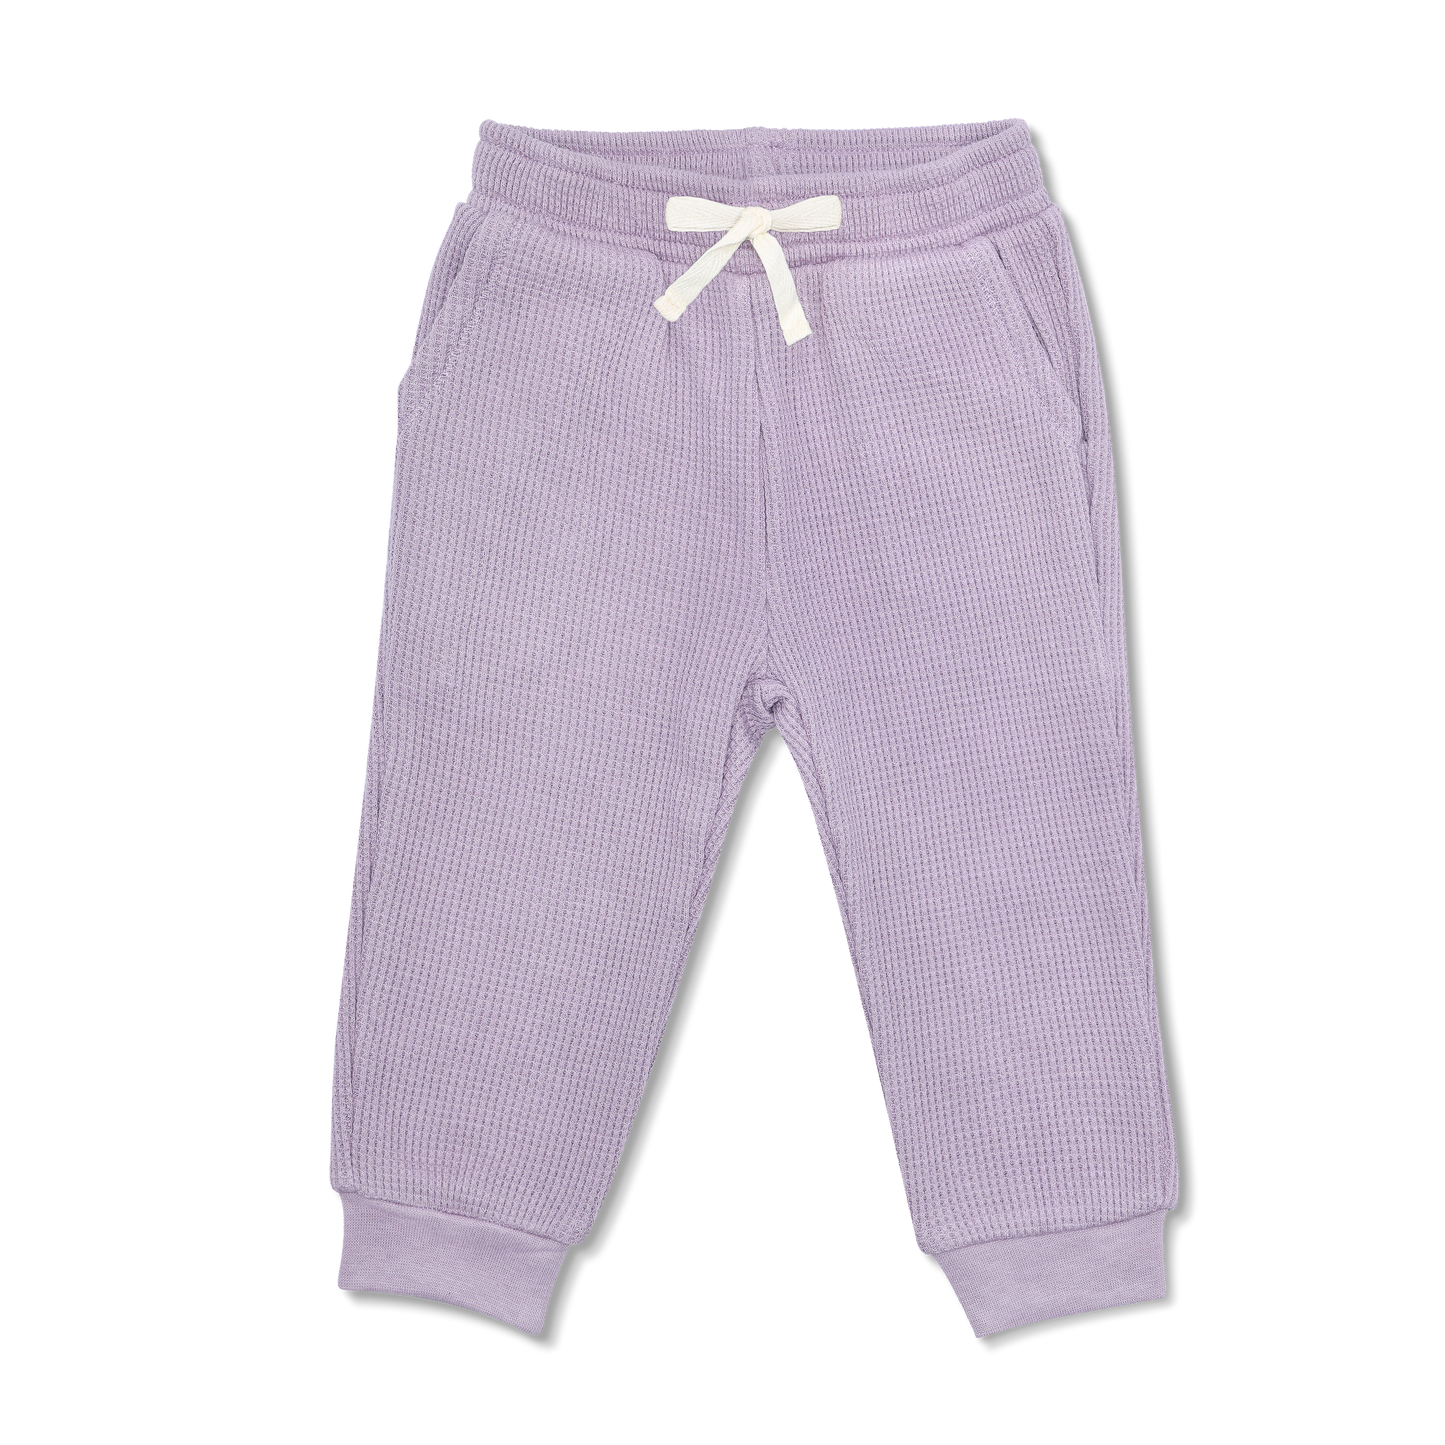 When it's time to play hard, it's time for our comfy joggers. Made from buttery-soft organic cotton, our joggers are extra styling with an elastic waistband and front pockets. A wardrobe staple for kids on the go! Pair with the Waffle Balloon Sleeve Sweater or the Waffle Crew Neck Sweater!